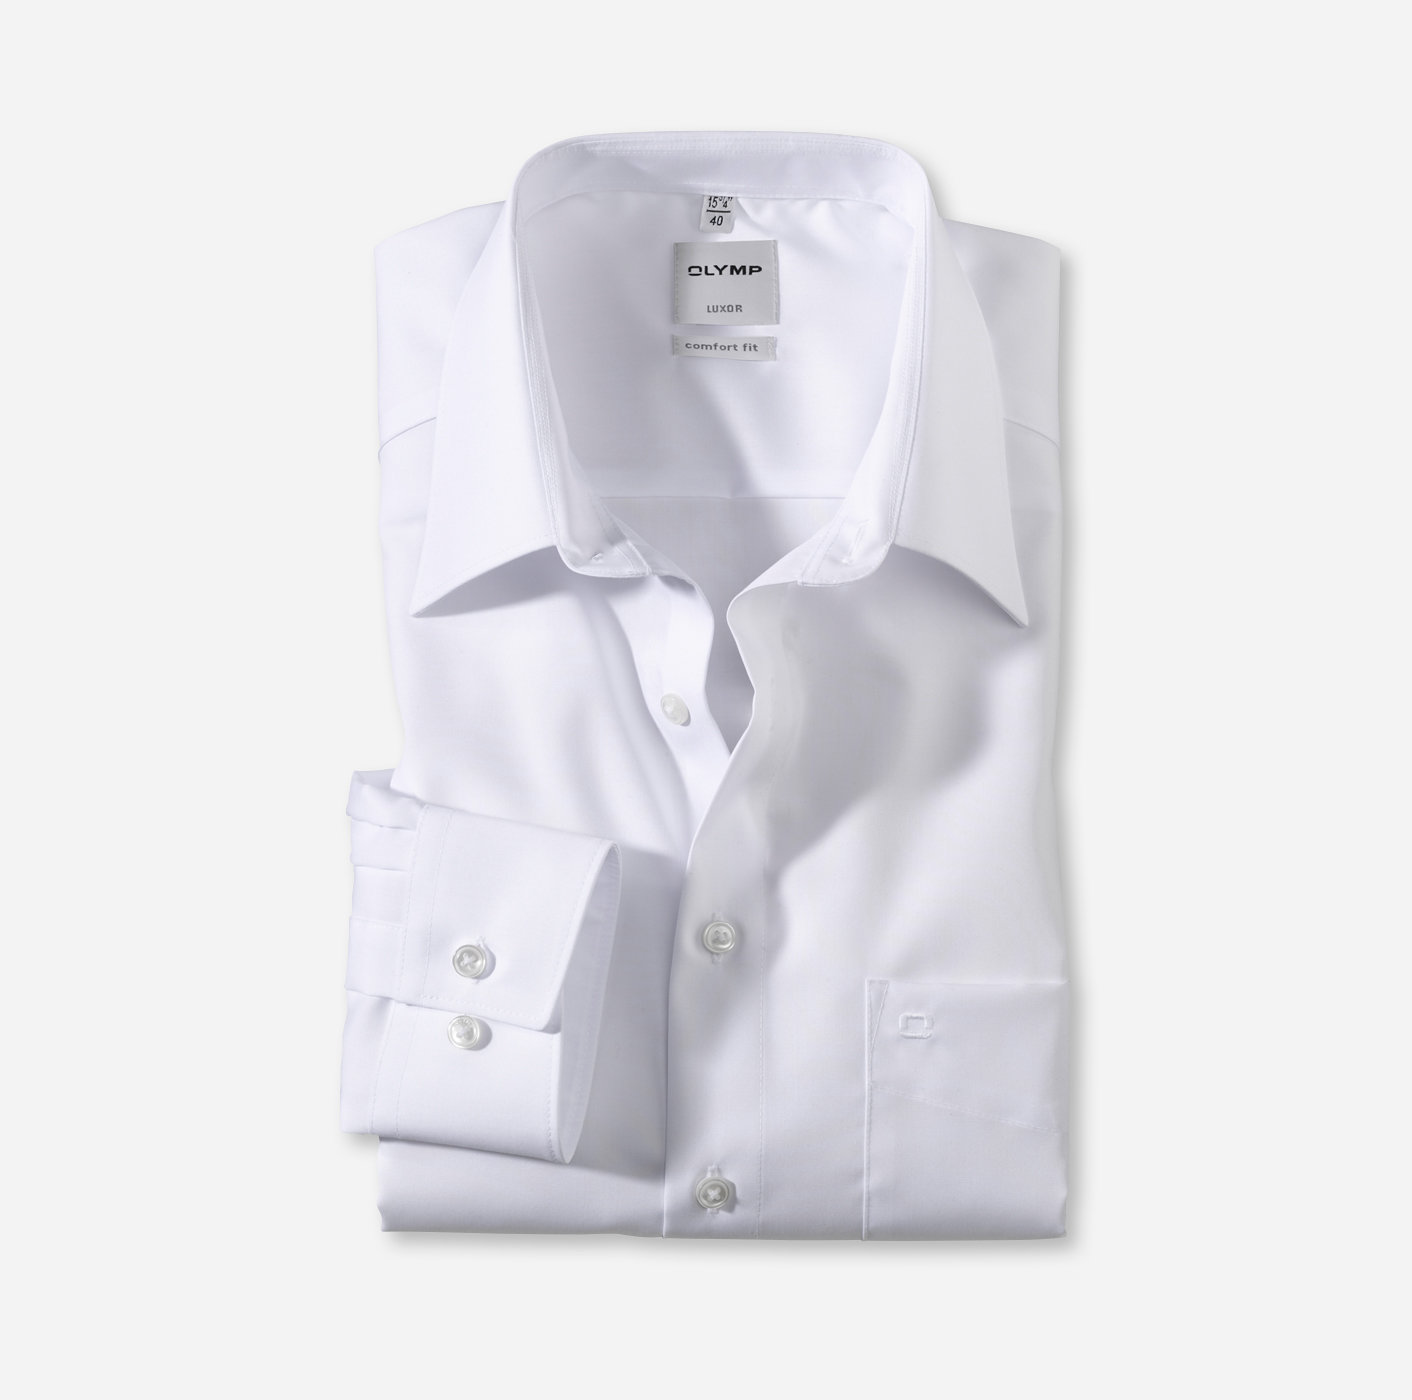 OLYMP Luxor, comfort fit, Business shirt, Manche extra courte, Kent, Blanc